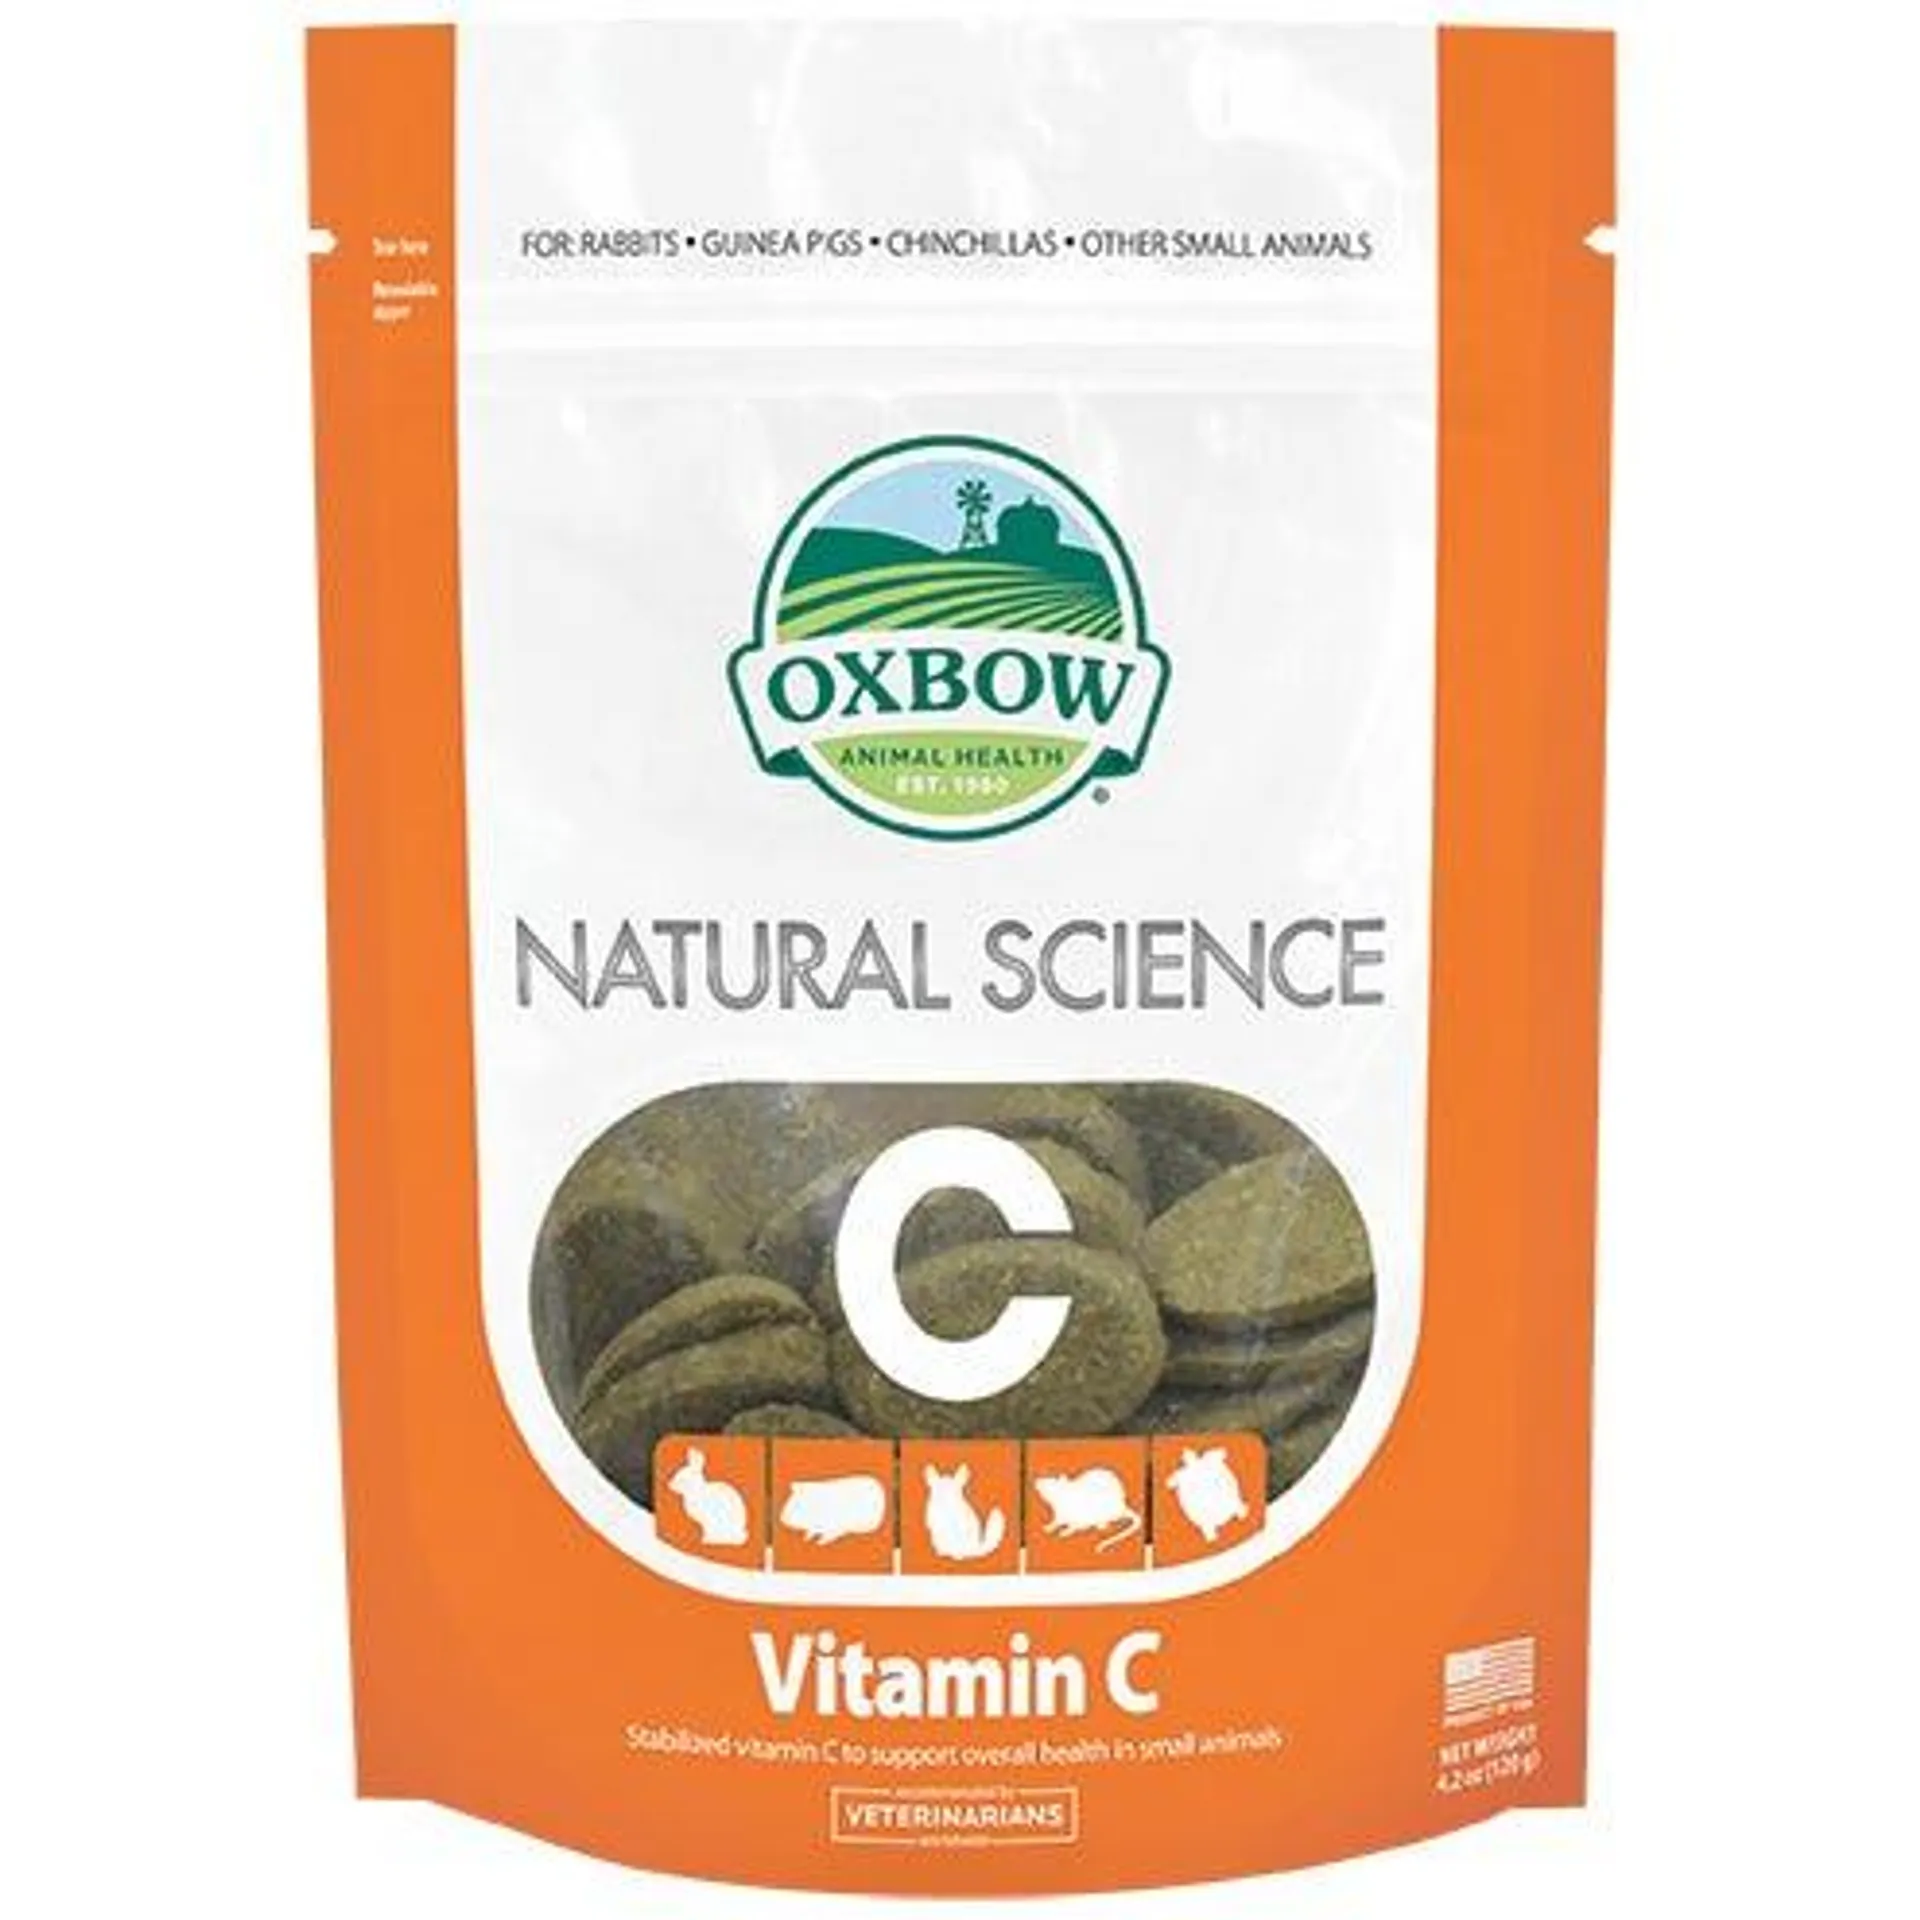 Oxbow Natural Science Vitamin C Supplement 120G